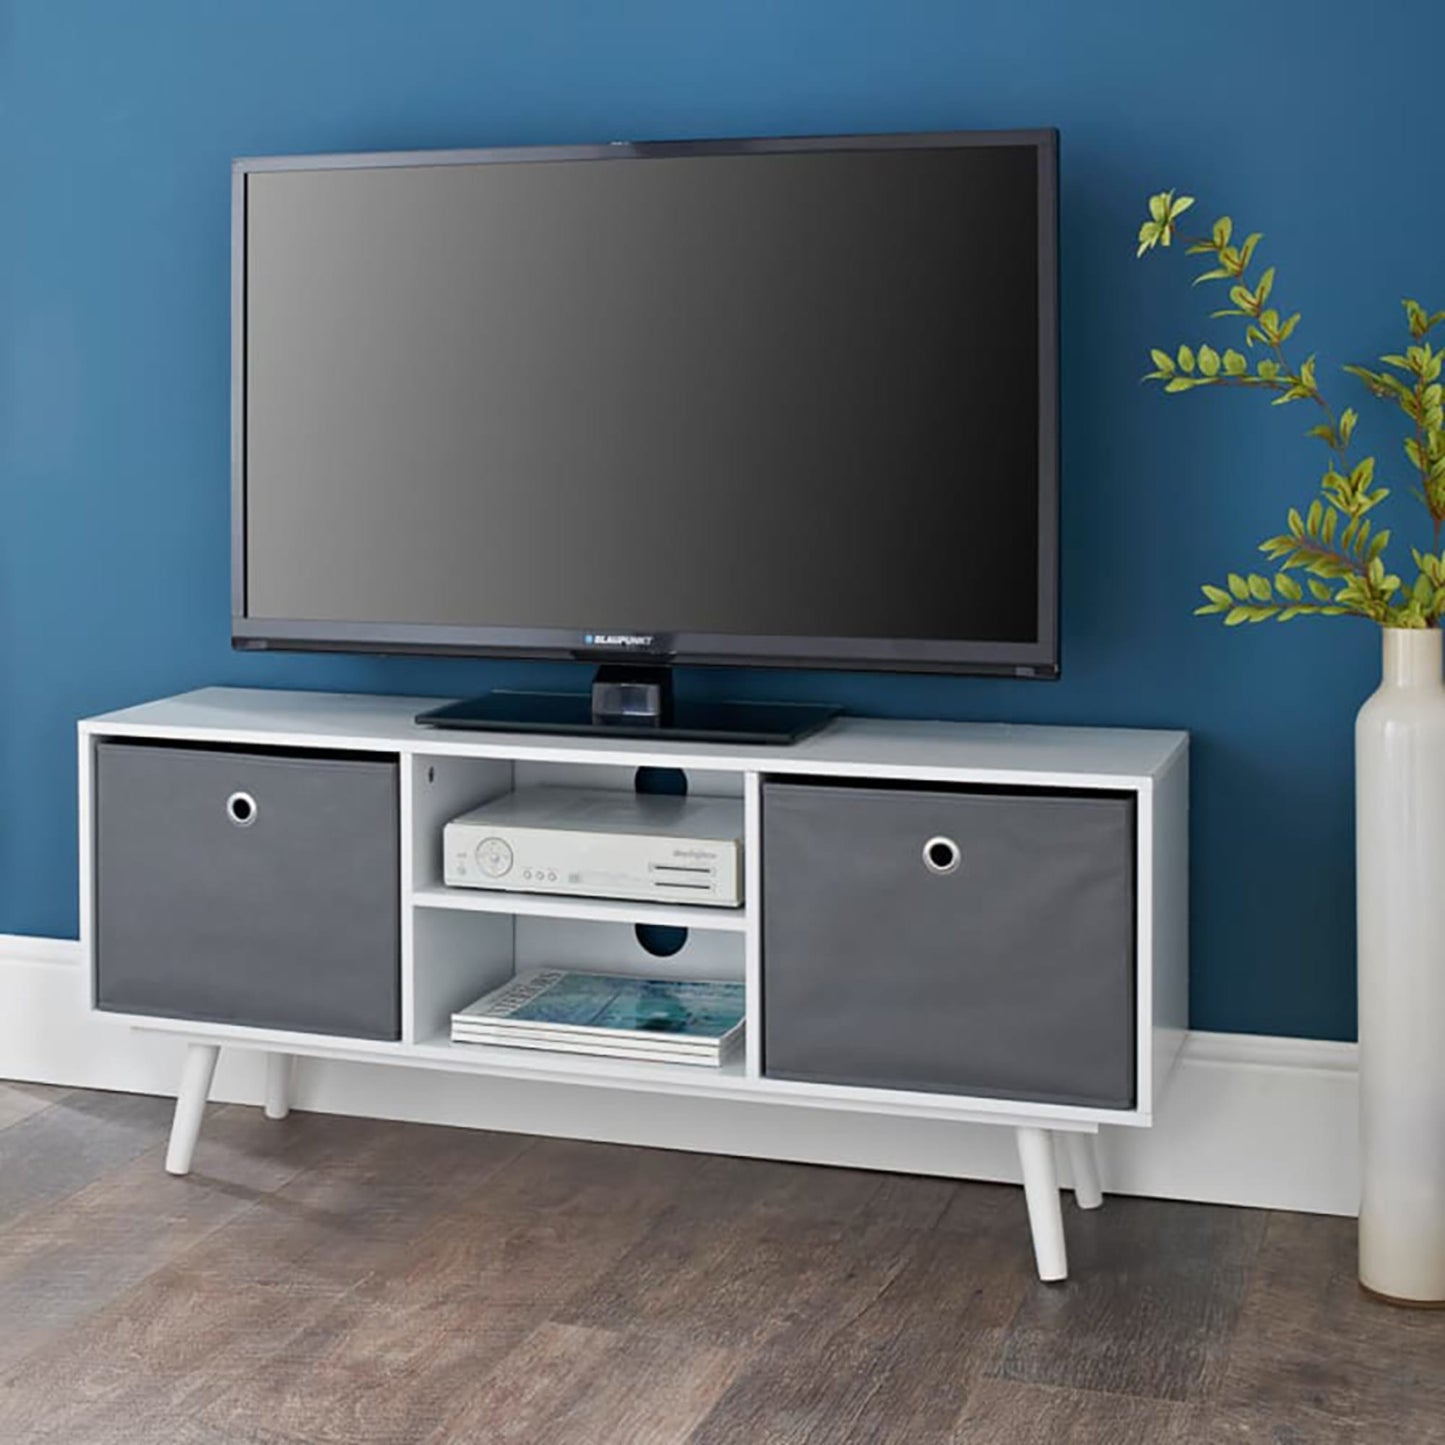 TV Stand with 2 Non-Woven Bins, White